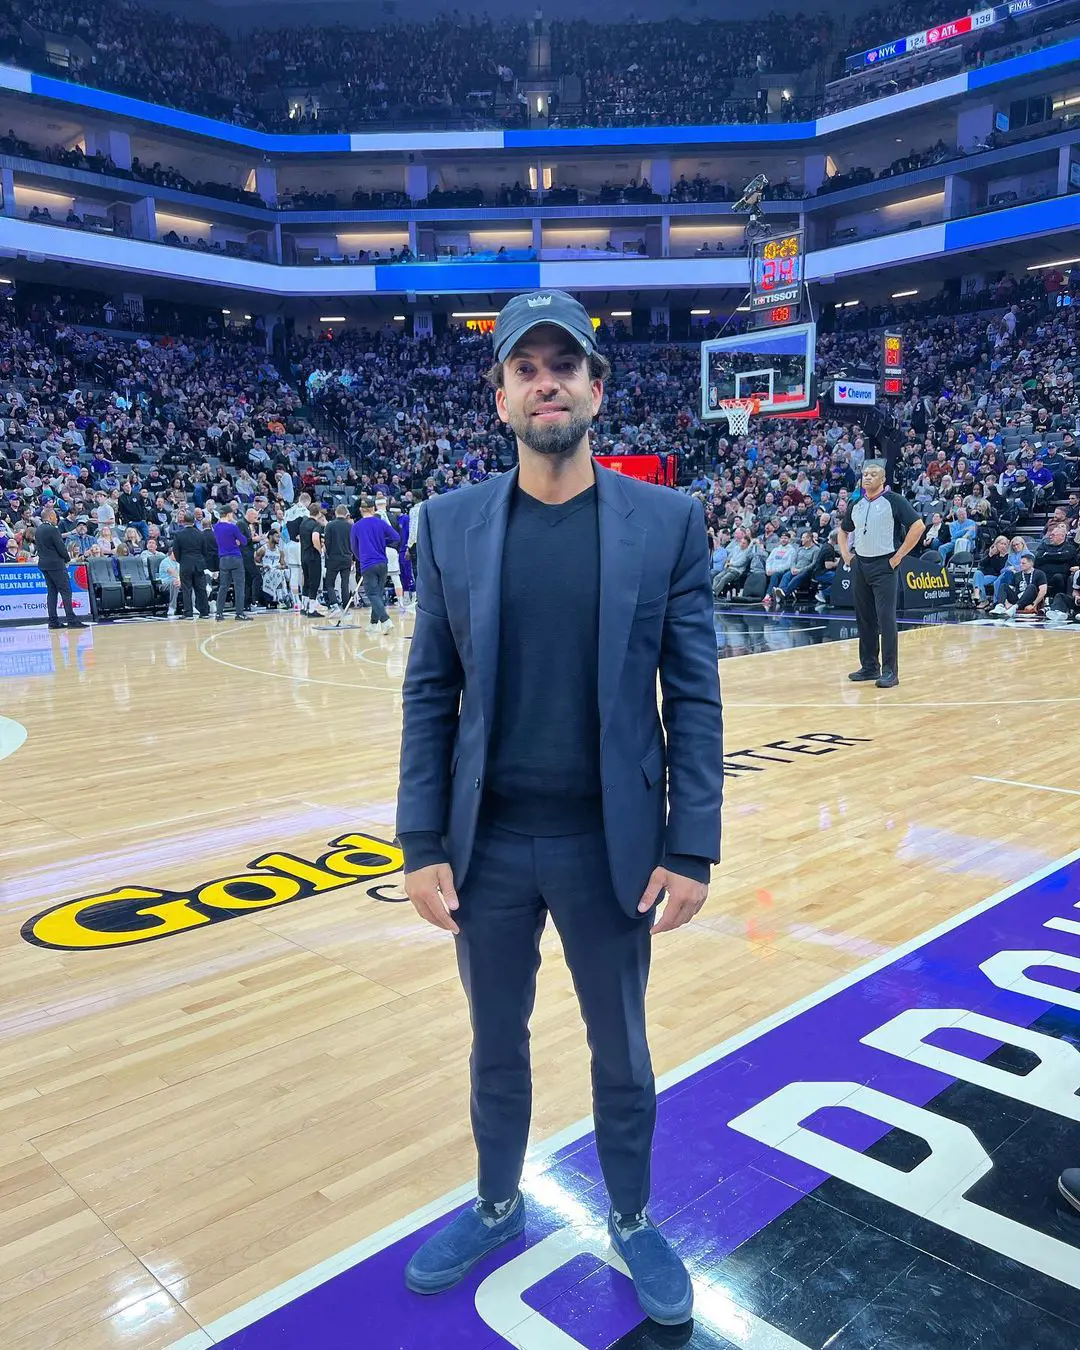 Aneel at the basketball field at the Golden 1 Center on January 21, 2023.